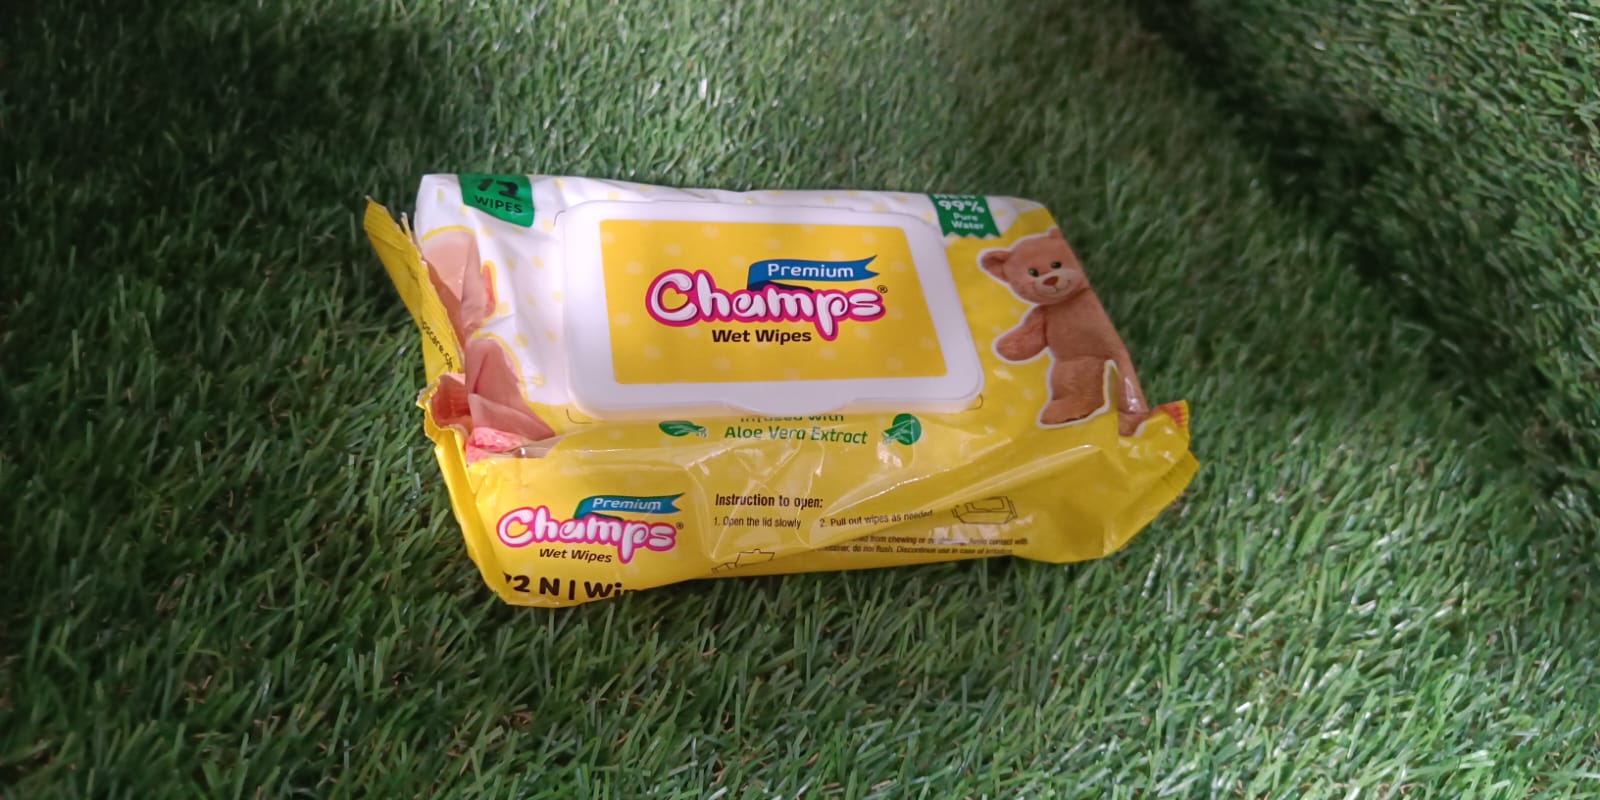 Champs Premium Wet Wipes Infused With Aloe Vera Extract Wet Wipes (72 N Wipes)